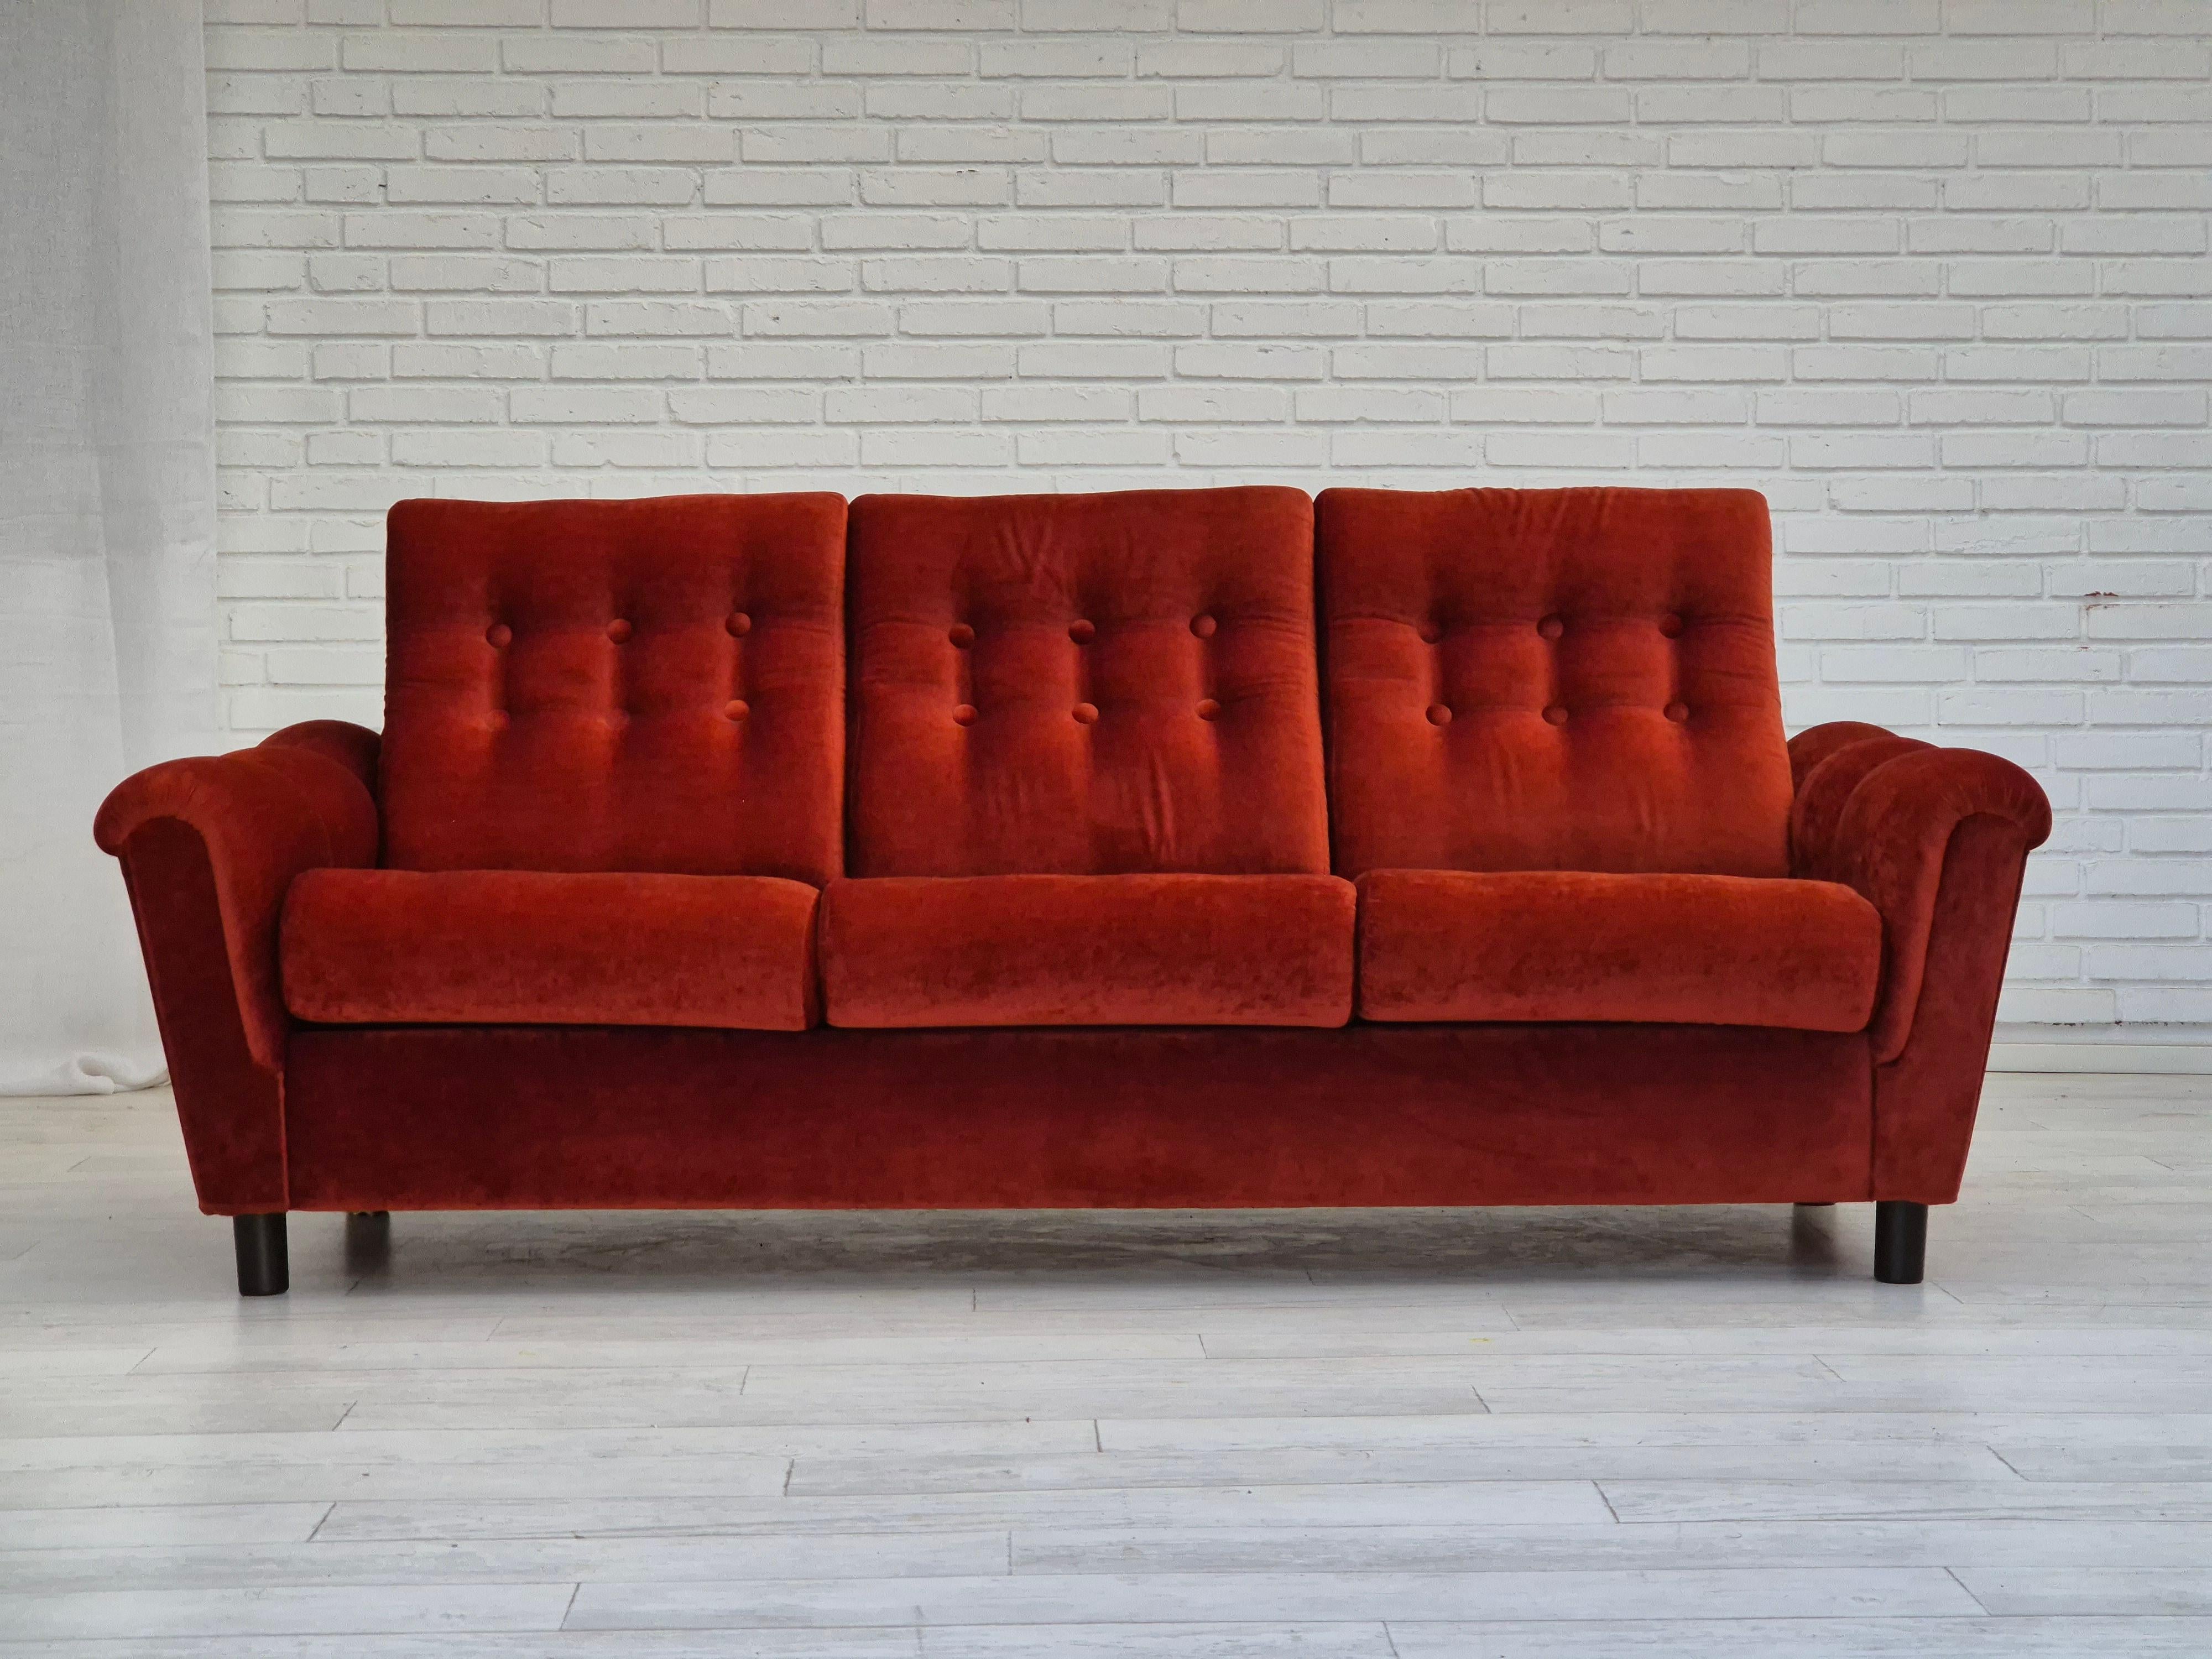 1980s, Danish 3 seater sofa in original very good condition: no smells and no stains. Classic 80s design. Brown/red furniture velour. Manufactured by Danish furniture manufacturer in about 1980-85s.